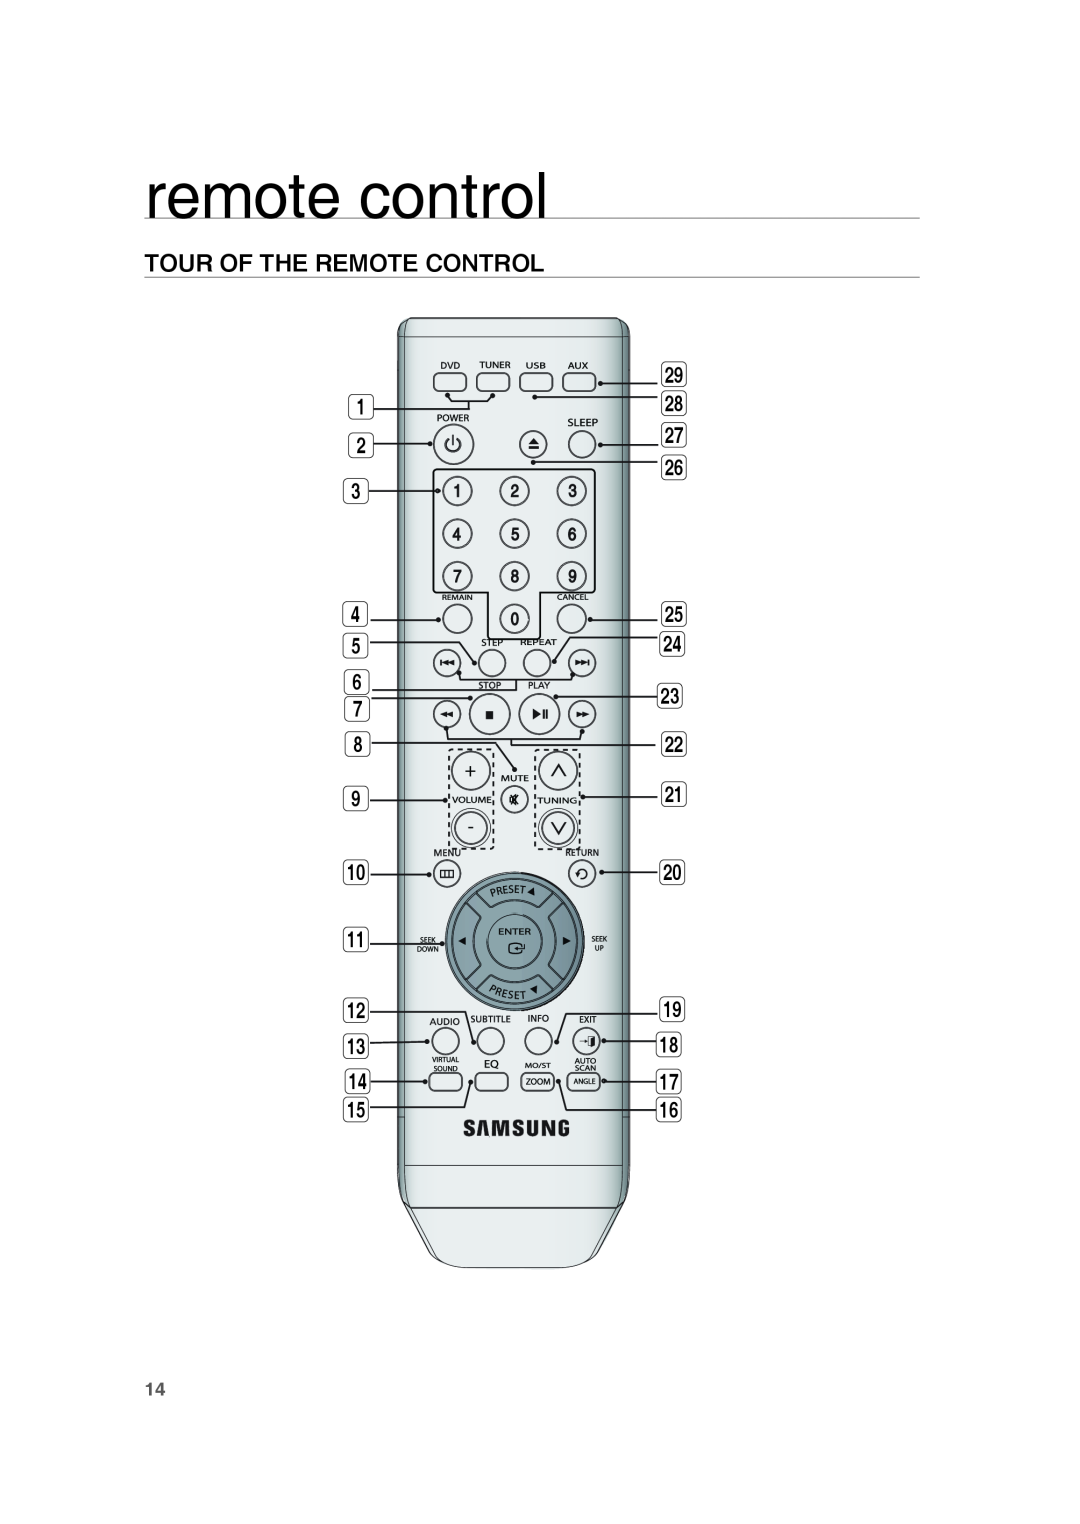 Samsung HE10T user manual Tour Of The Remote Control, 8 9, remote control 